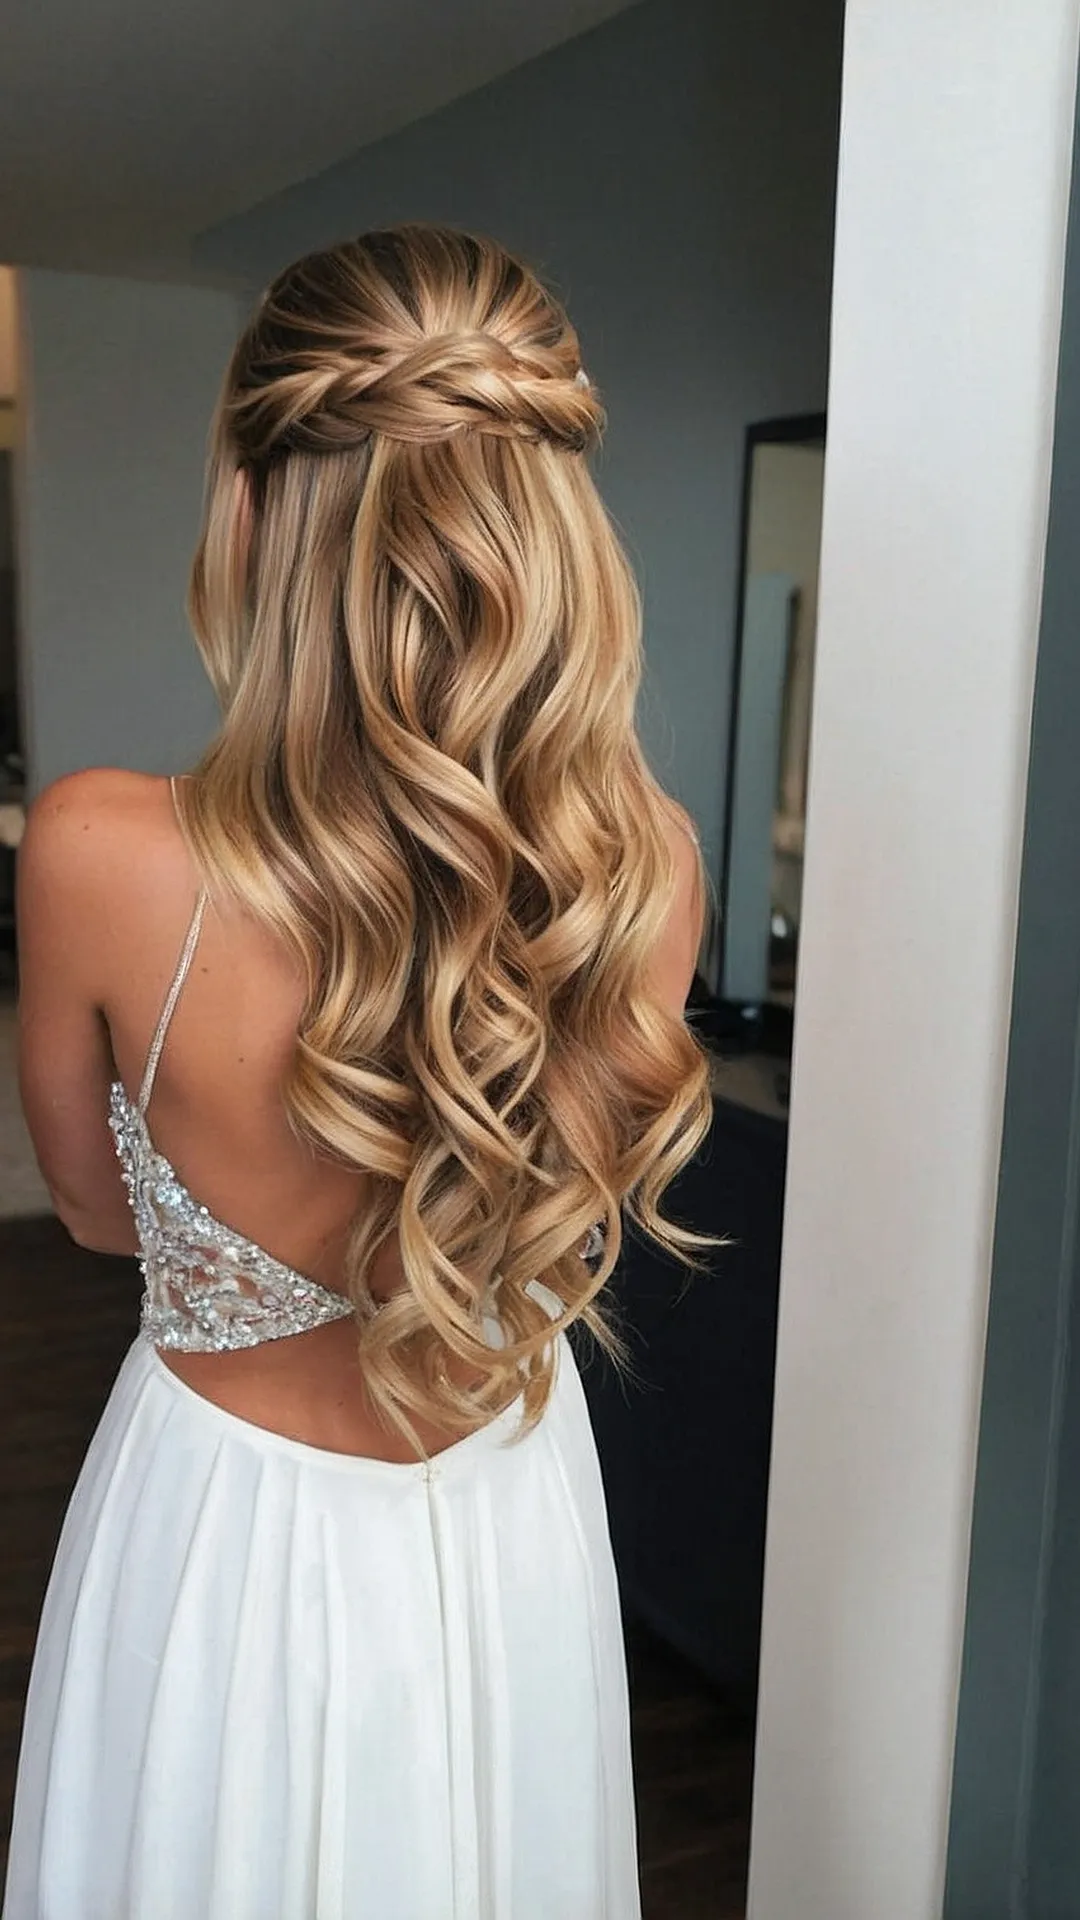 Vintage Glamour: Retro Prom Hairstyles